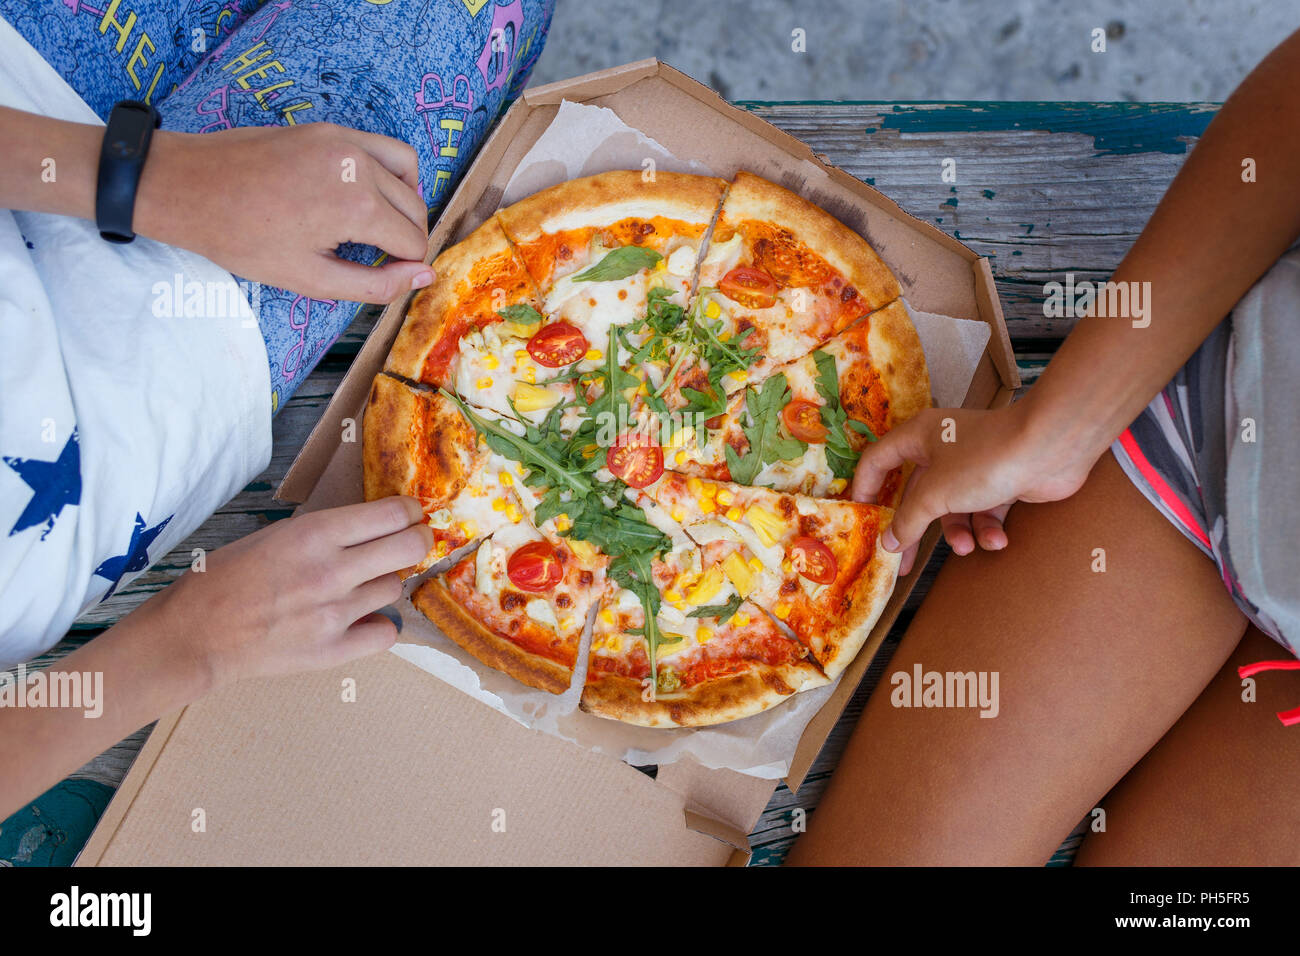 Two girls eating pizza outdoors together. Top view image of summer picninc concept Stock Photo